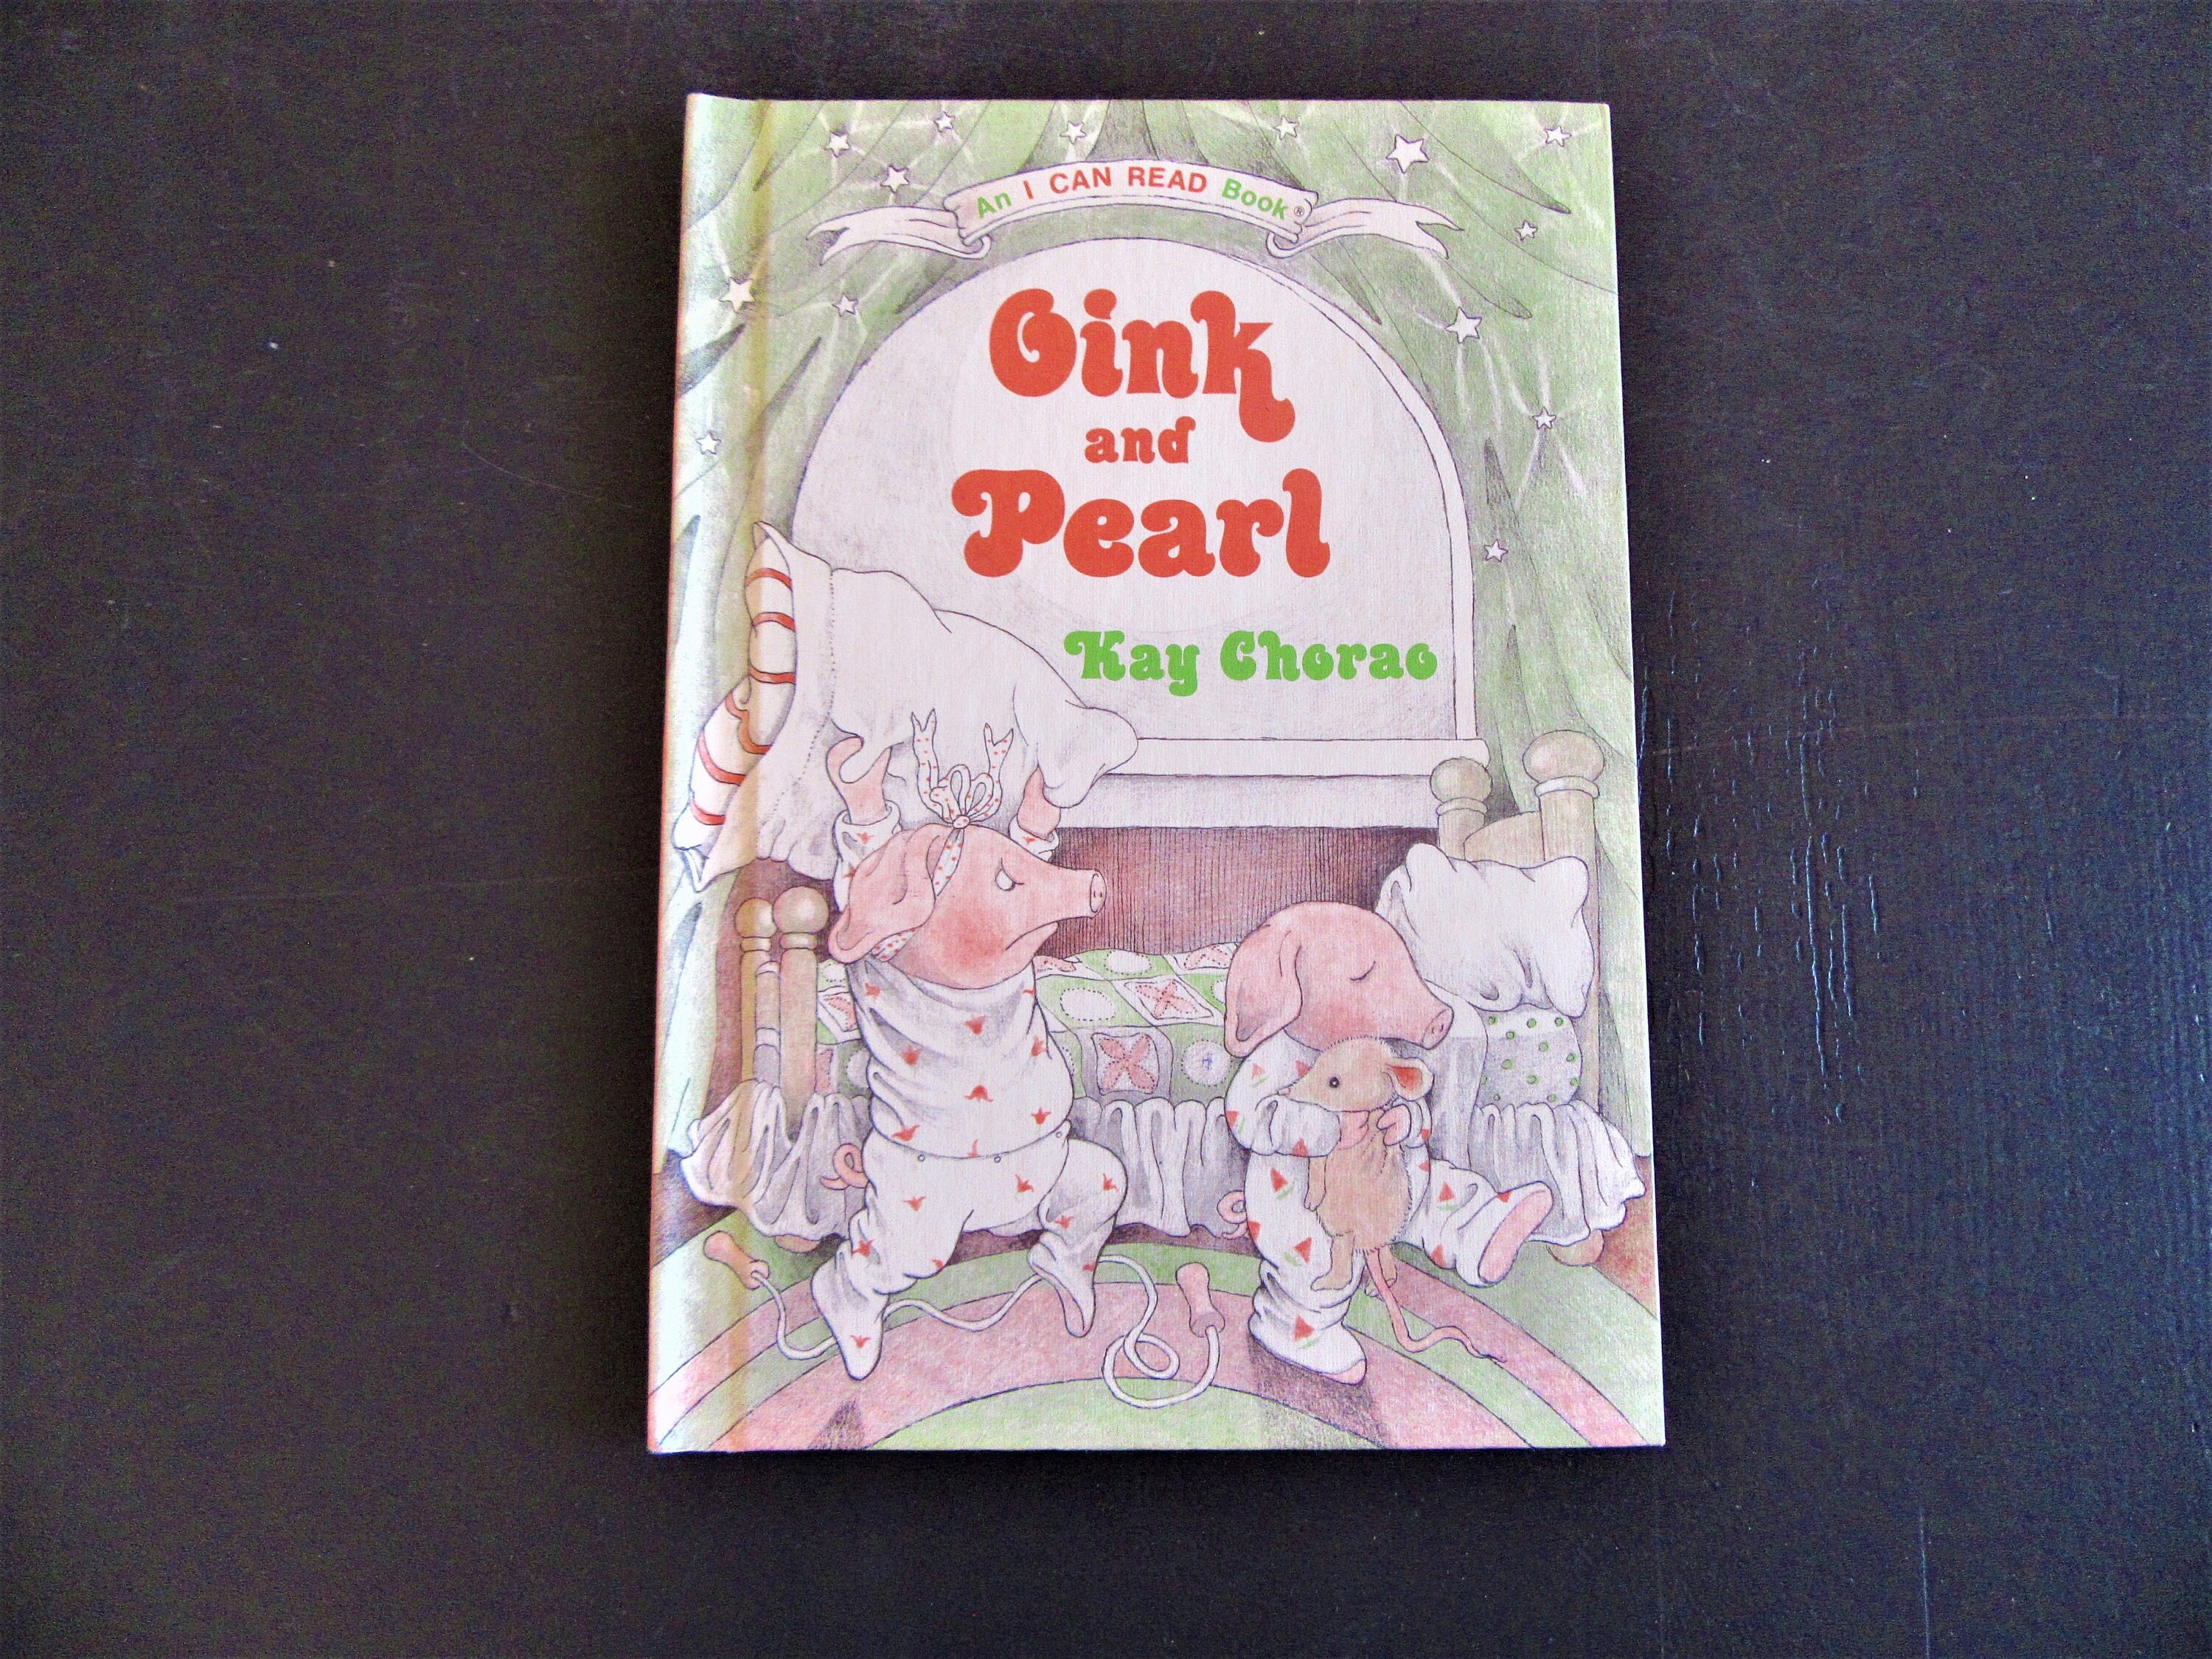 First Edition 1972 Moke and Poki in the Rain Forest by Mamoru Funai  Illustrated I CAN READ Book